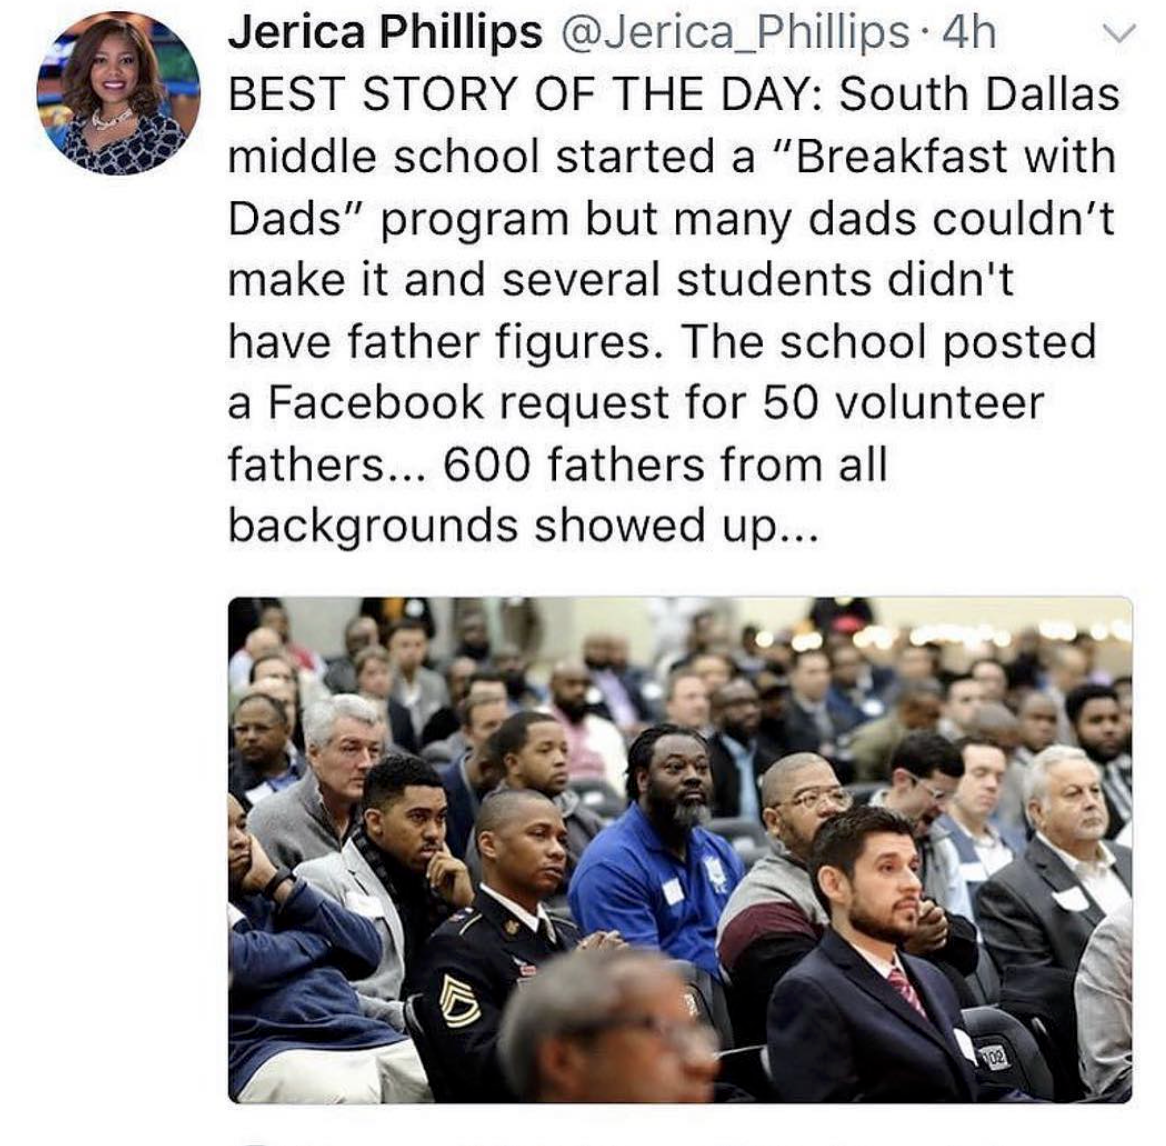 wholesome memes and pics - crowd - Jerica Phillips . 4h Best Story Of The Day South Dallas middle school started a "Breakfast with Dads" program but many dads couldn't make it and several students didn't have father figures. The school posted a Facebook r